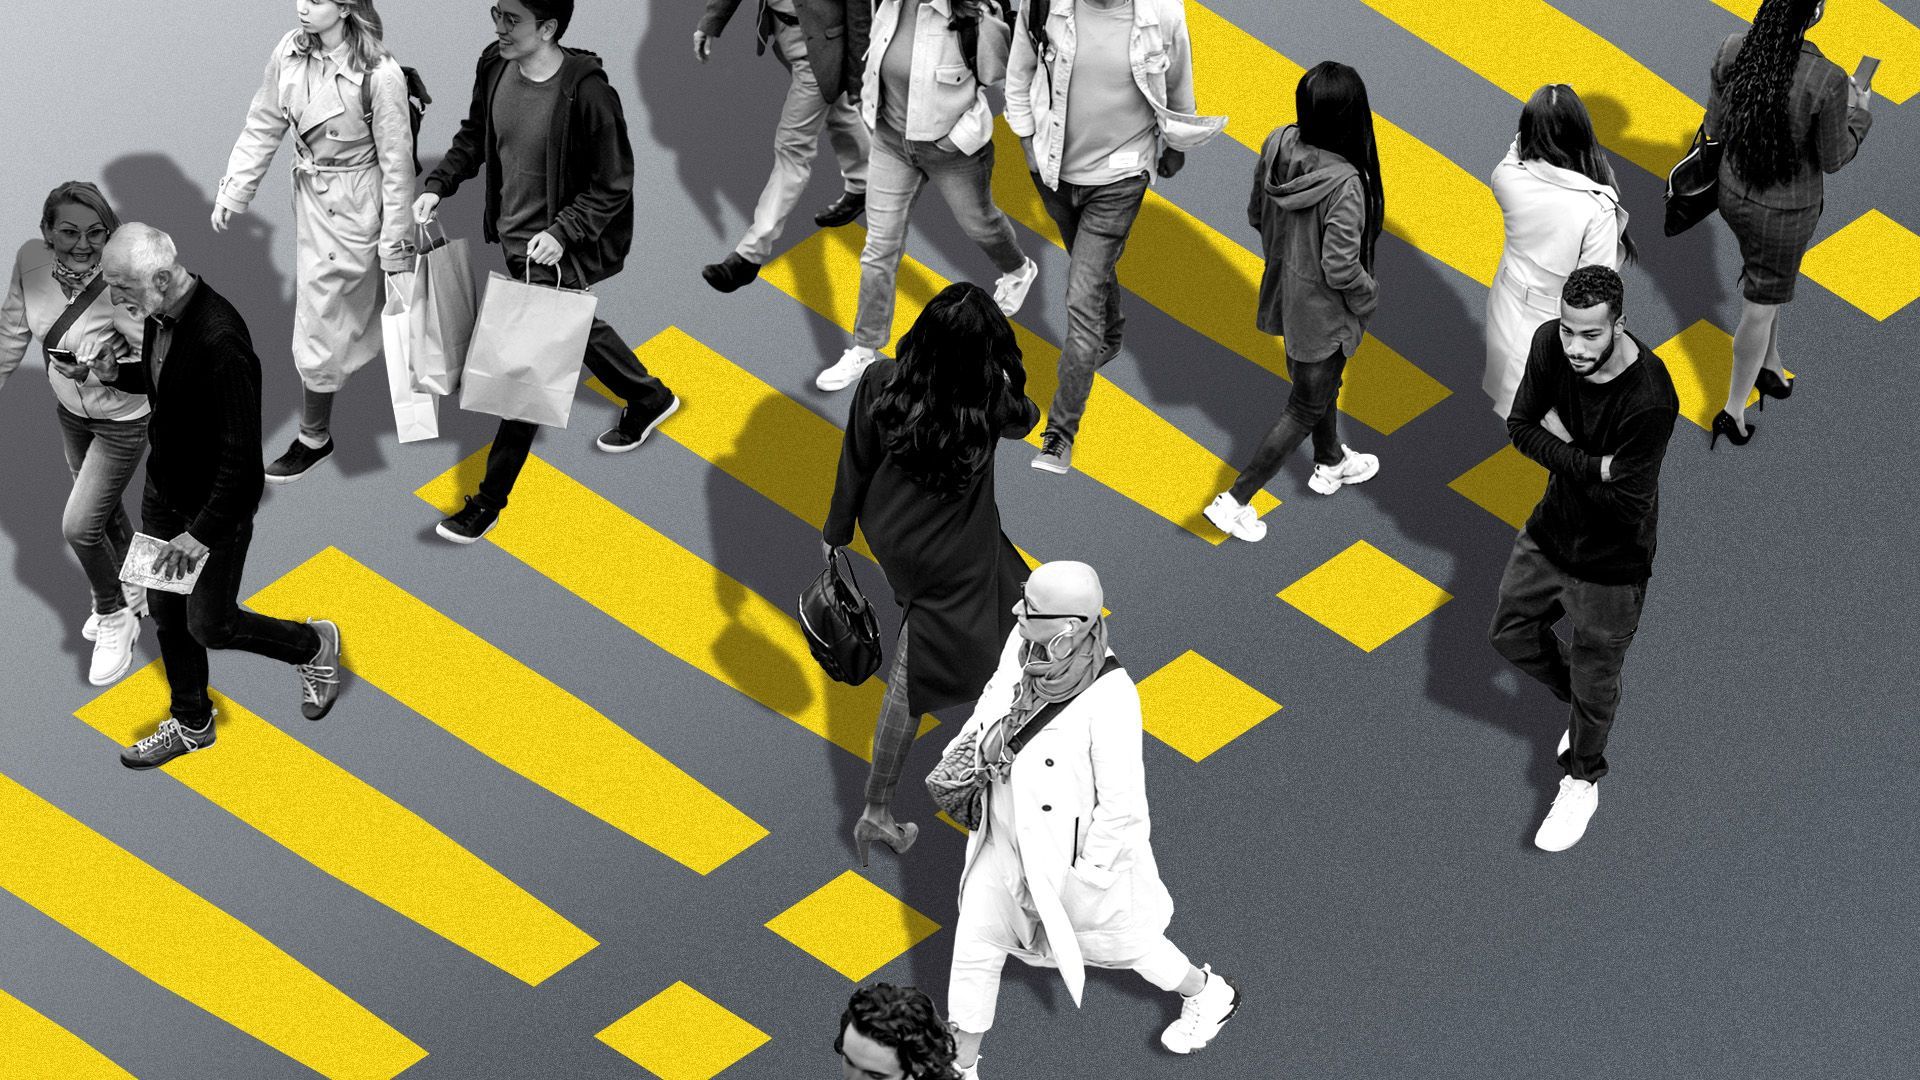 Illustration of a group of people crossing a crosswalk with exclamation points for lines